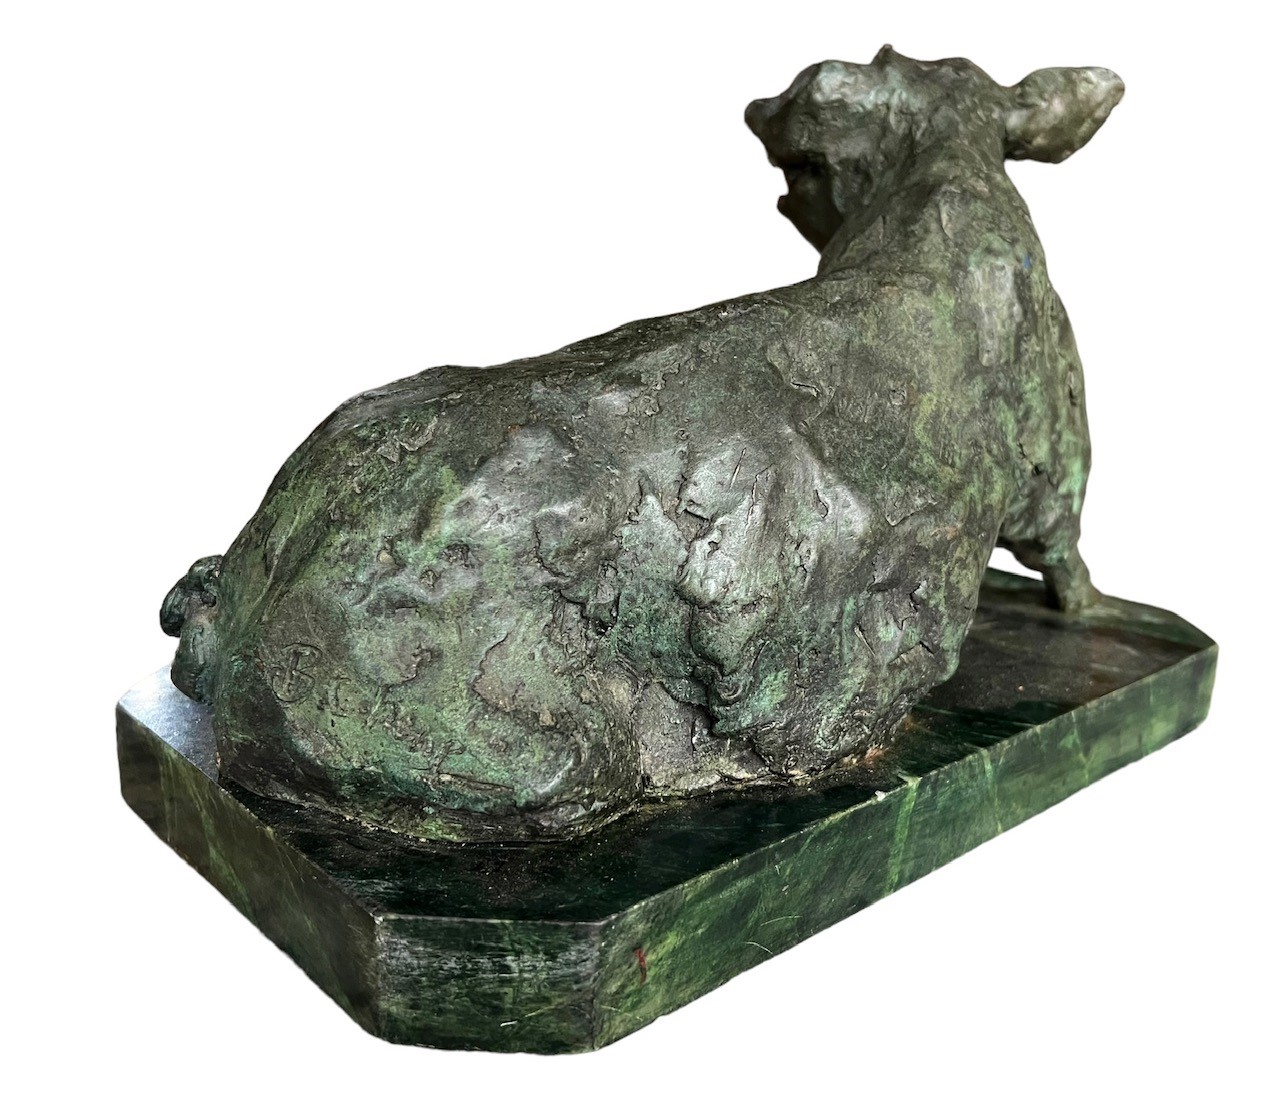 A DECORATIVE 20TH CENTURY BRONZE SCULPTURE OF A SEATED PIG Raised on a marble plinth base, - Image 5 of 8